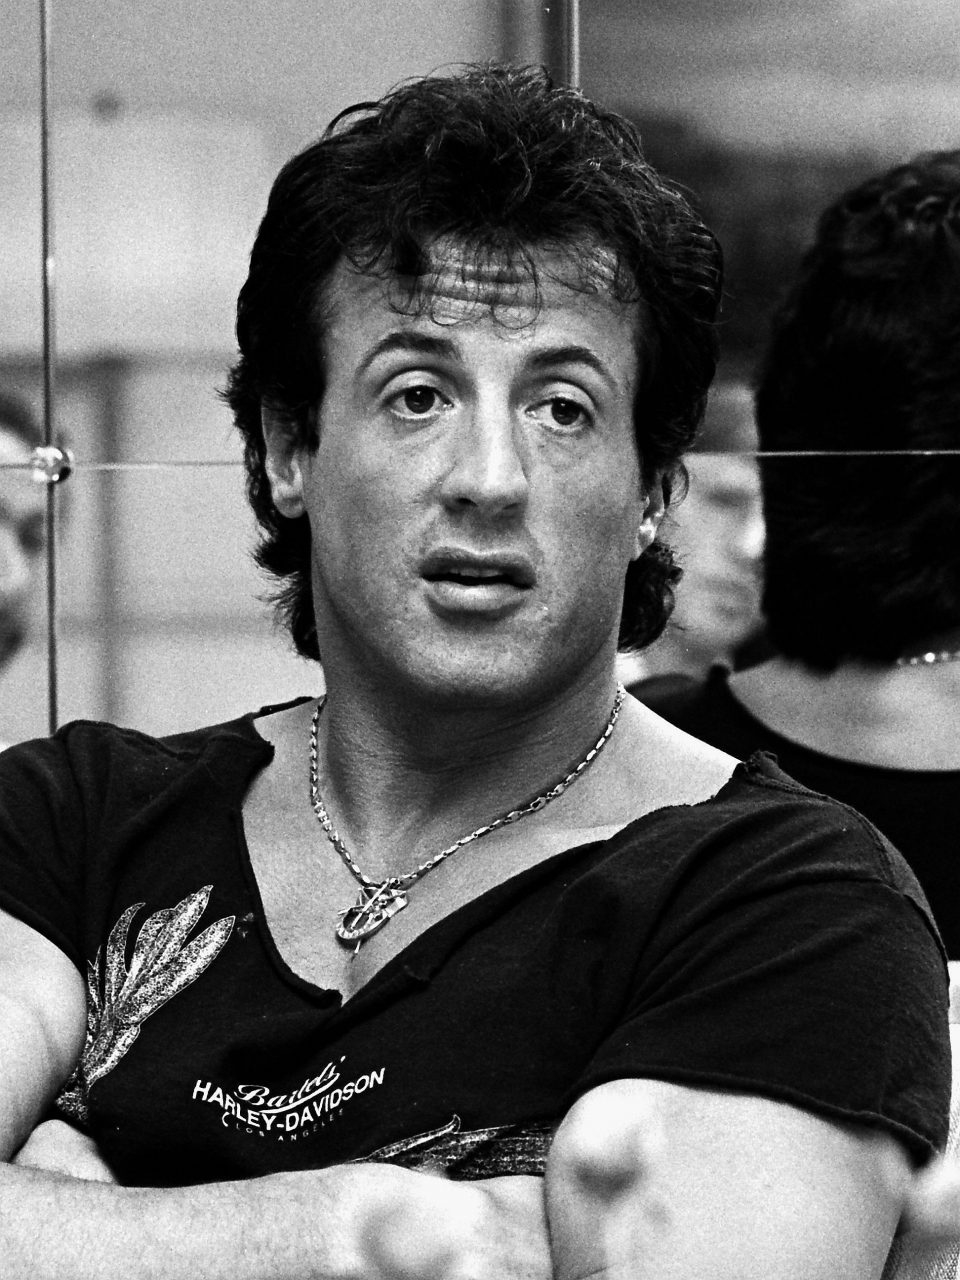 Hot Young Picture Of Sylvester Stallone